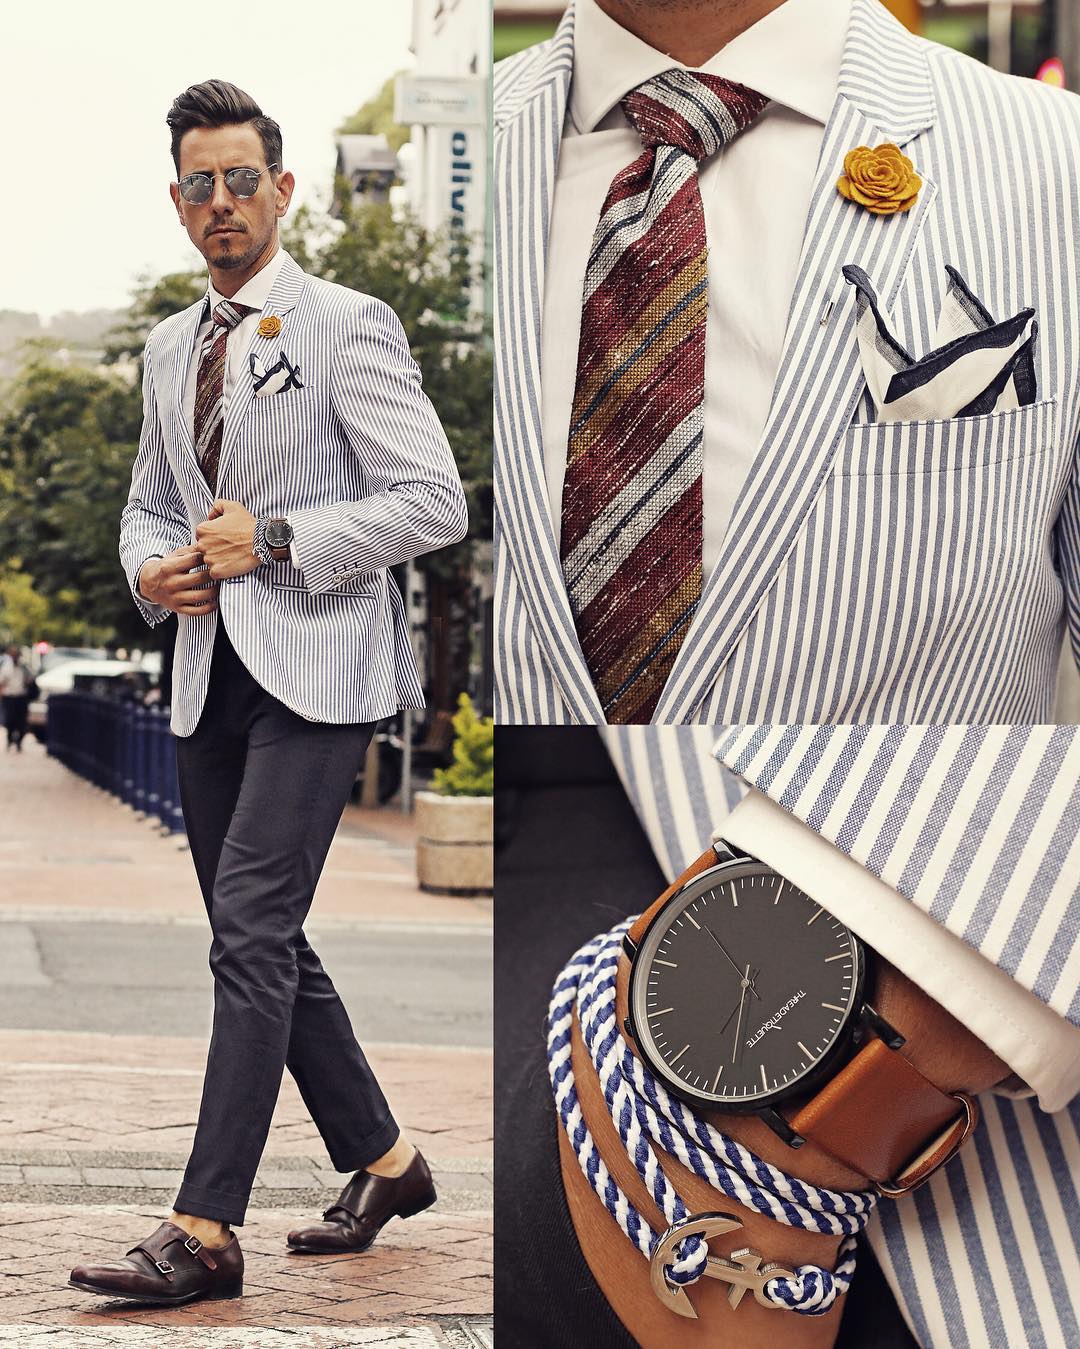 Suit, Watch And Accessories Combinations For Men